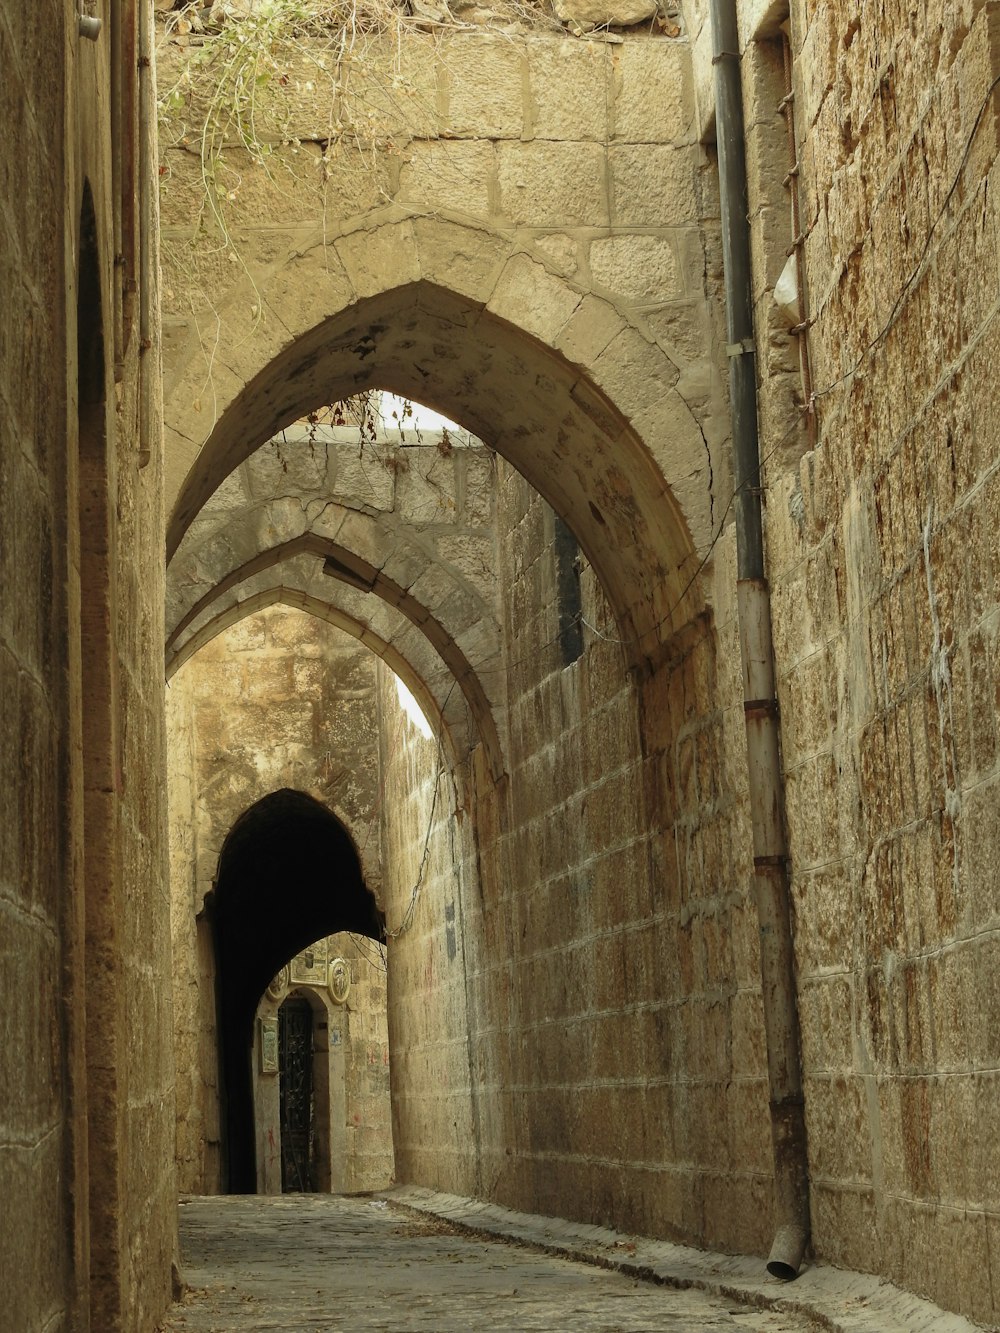 a narrow alley way with stone walls and arches